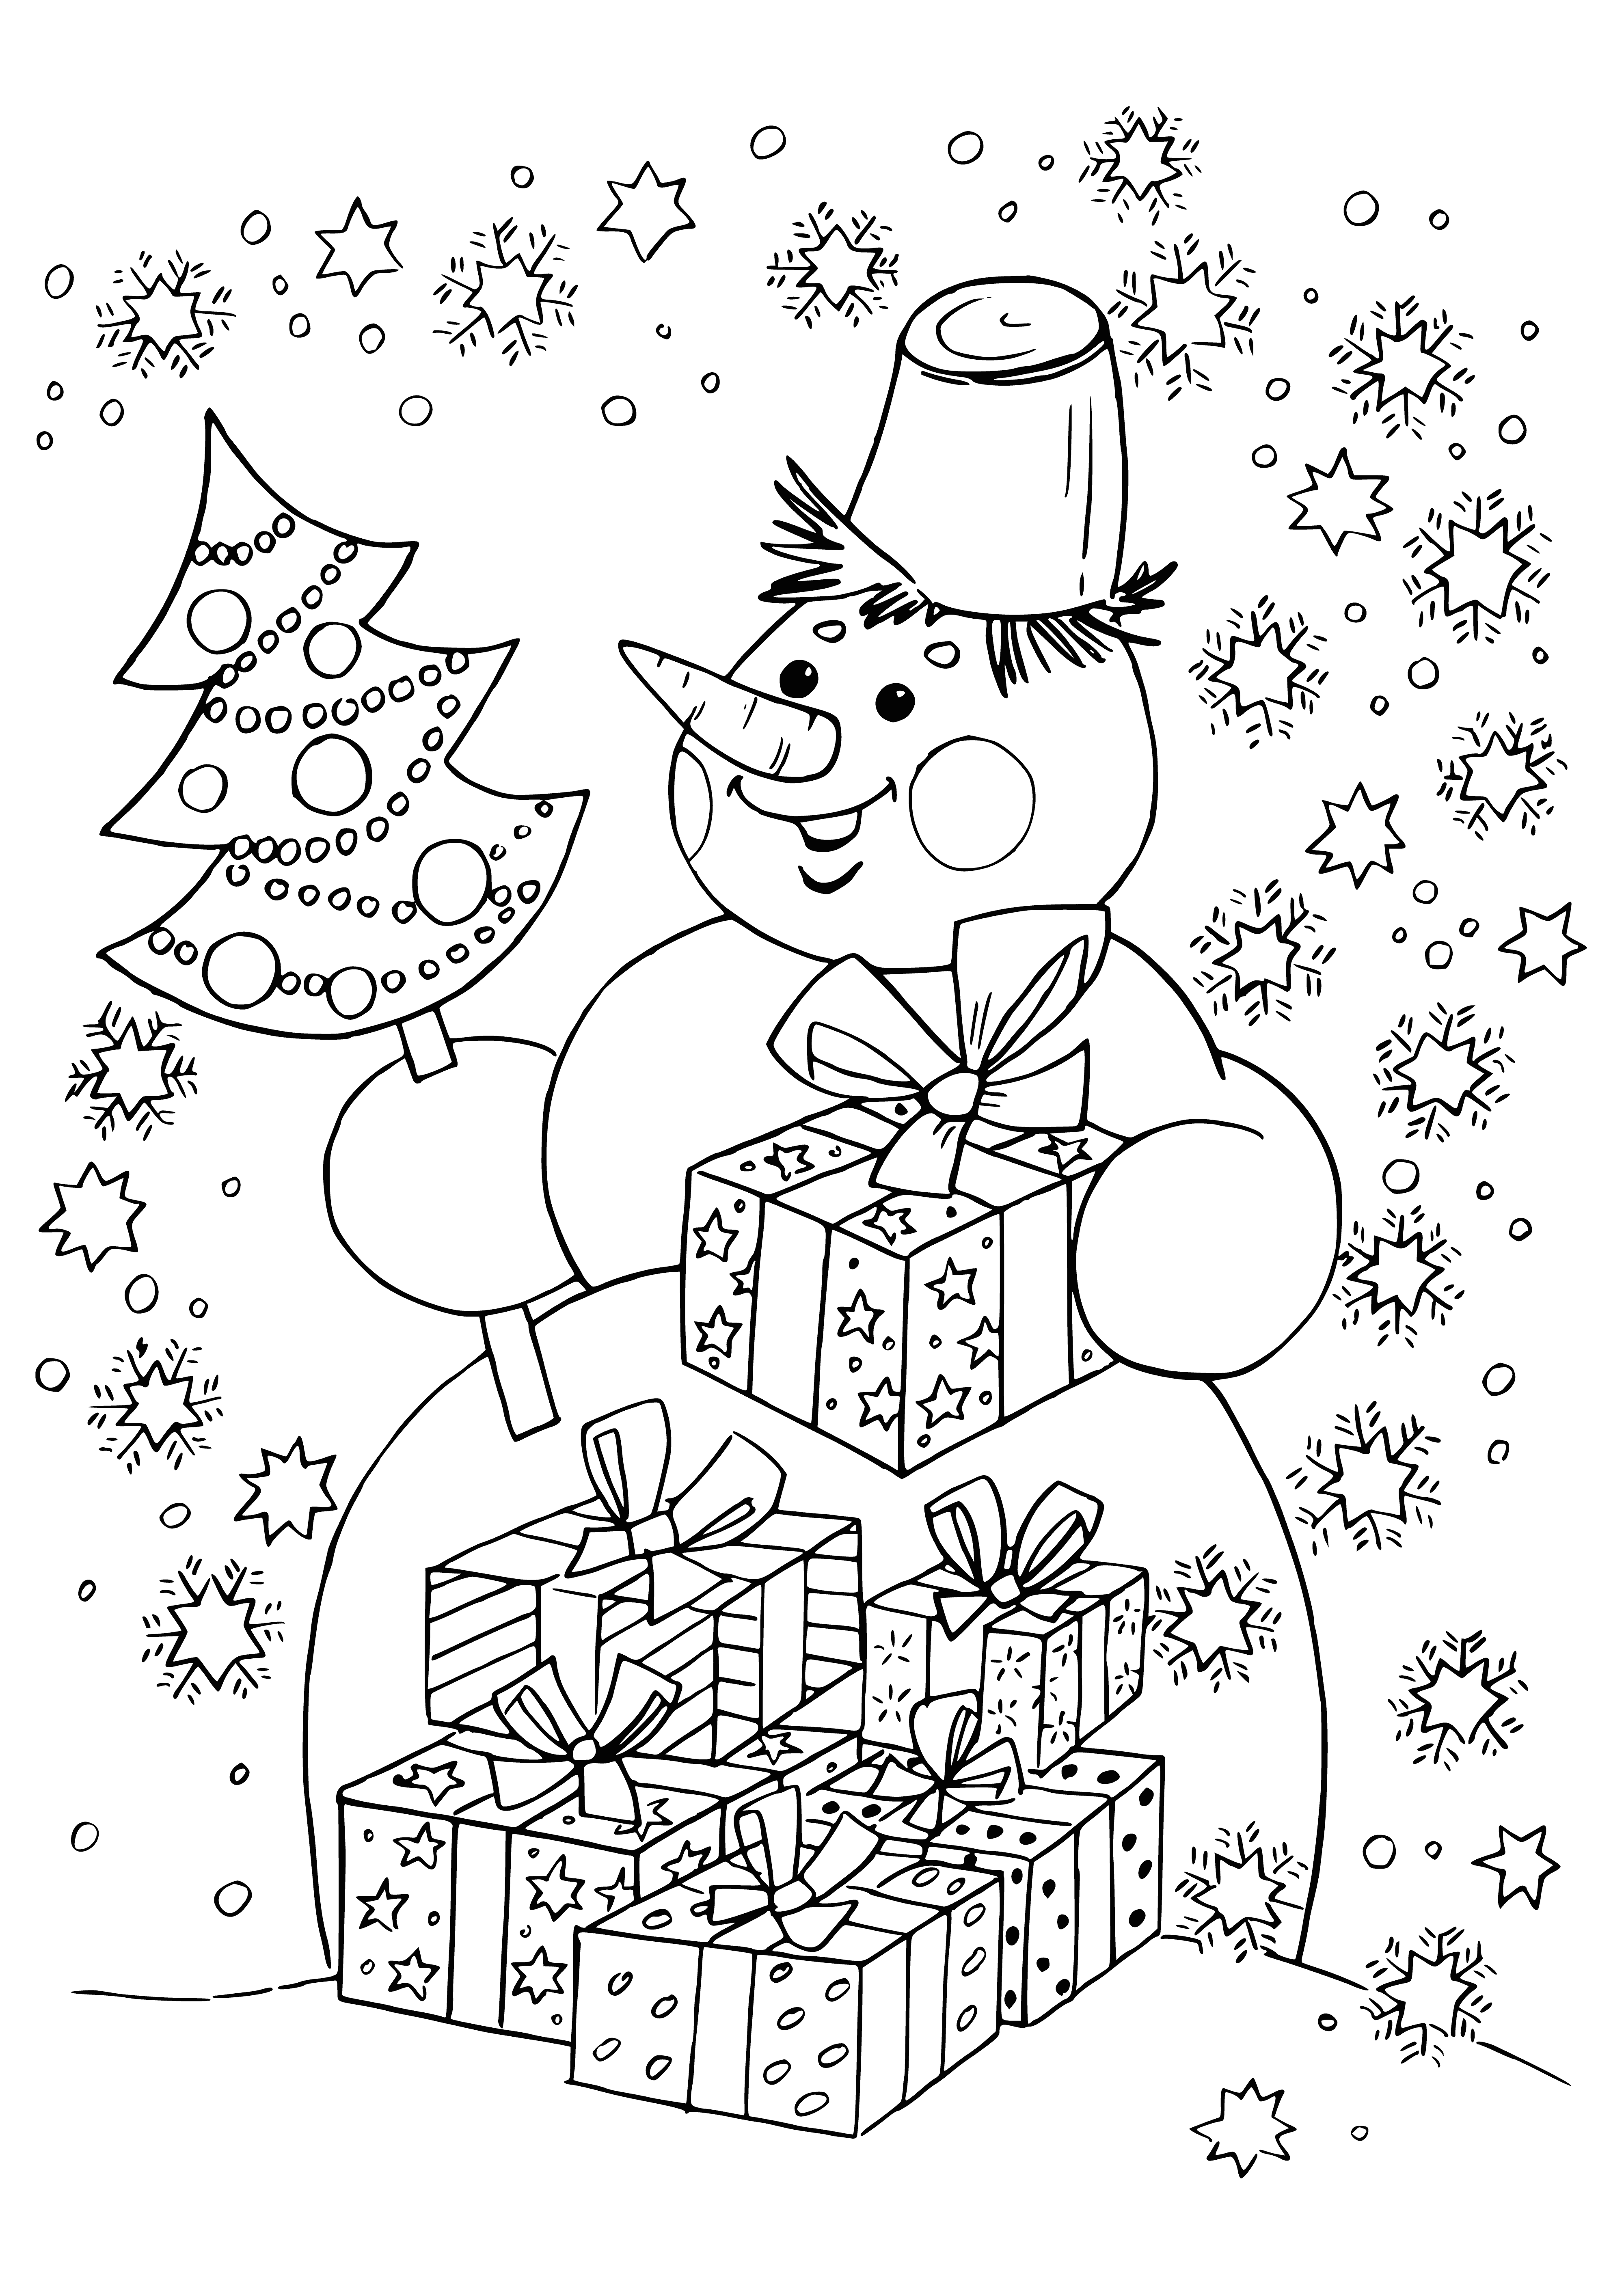 coloring page: A snowman with a carrot nose and gifts of a large red ball, green wrapped present, and polka dot bag decorates the center of this coloring page.